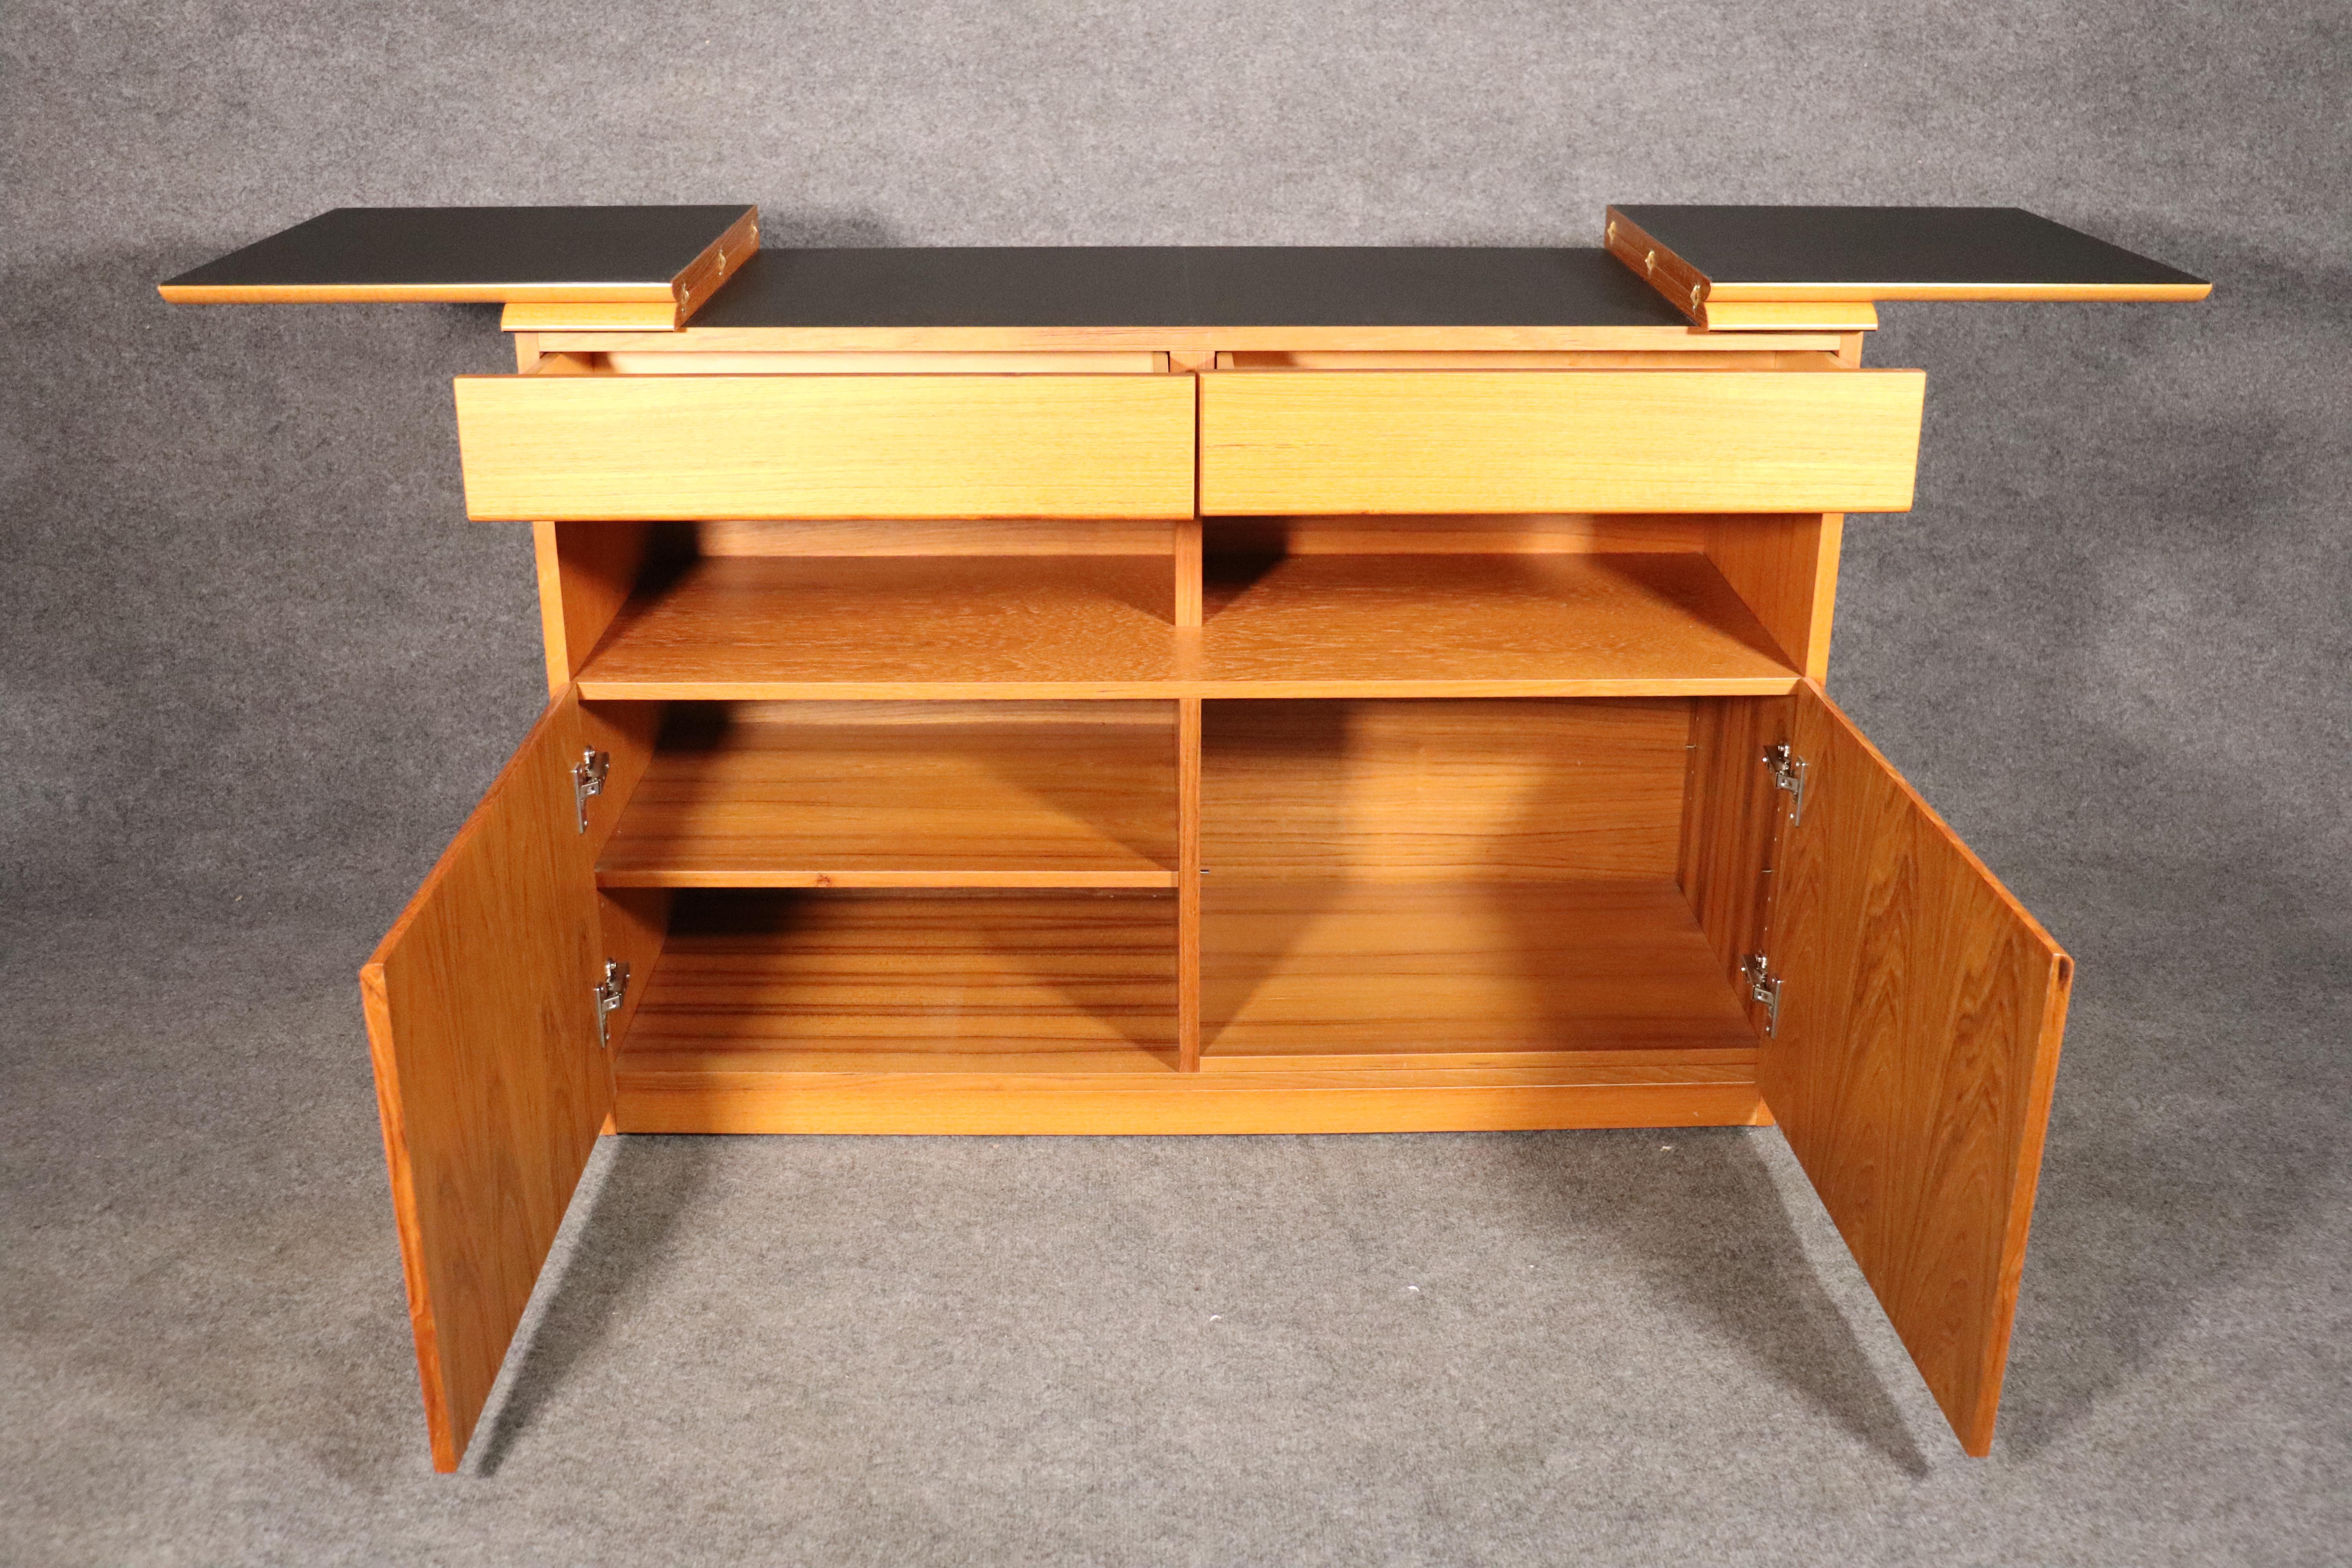 Danish Mid-Century Modern server with fold down top. Ample cabinet storage and flip top bar space with black laminate.
Open top: 69.75